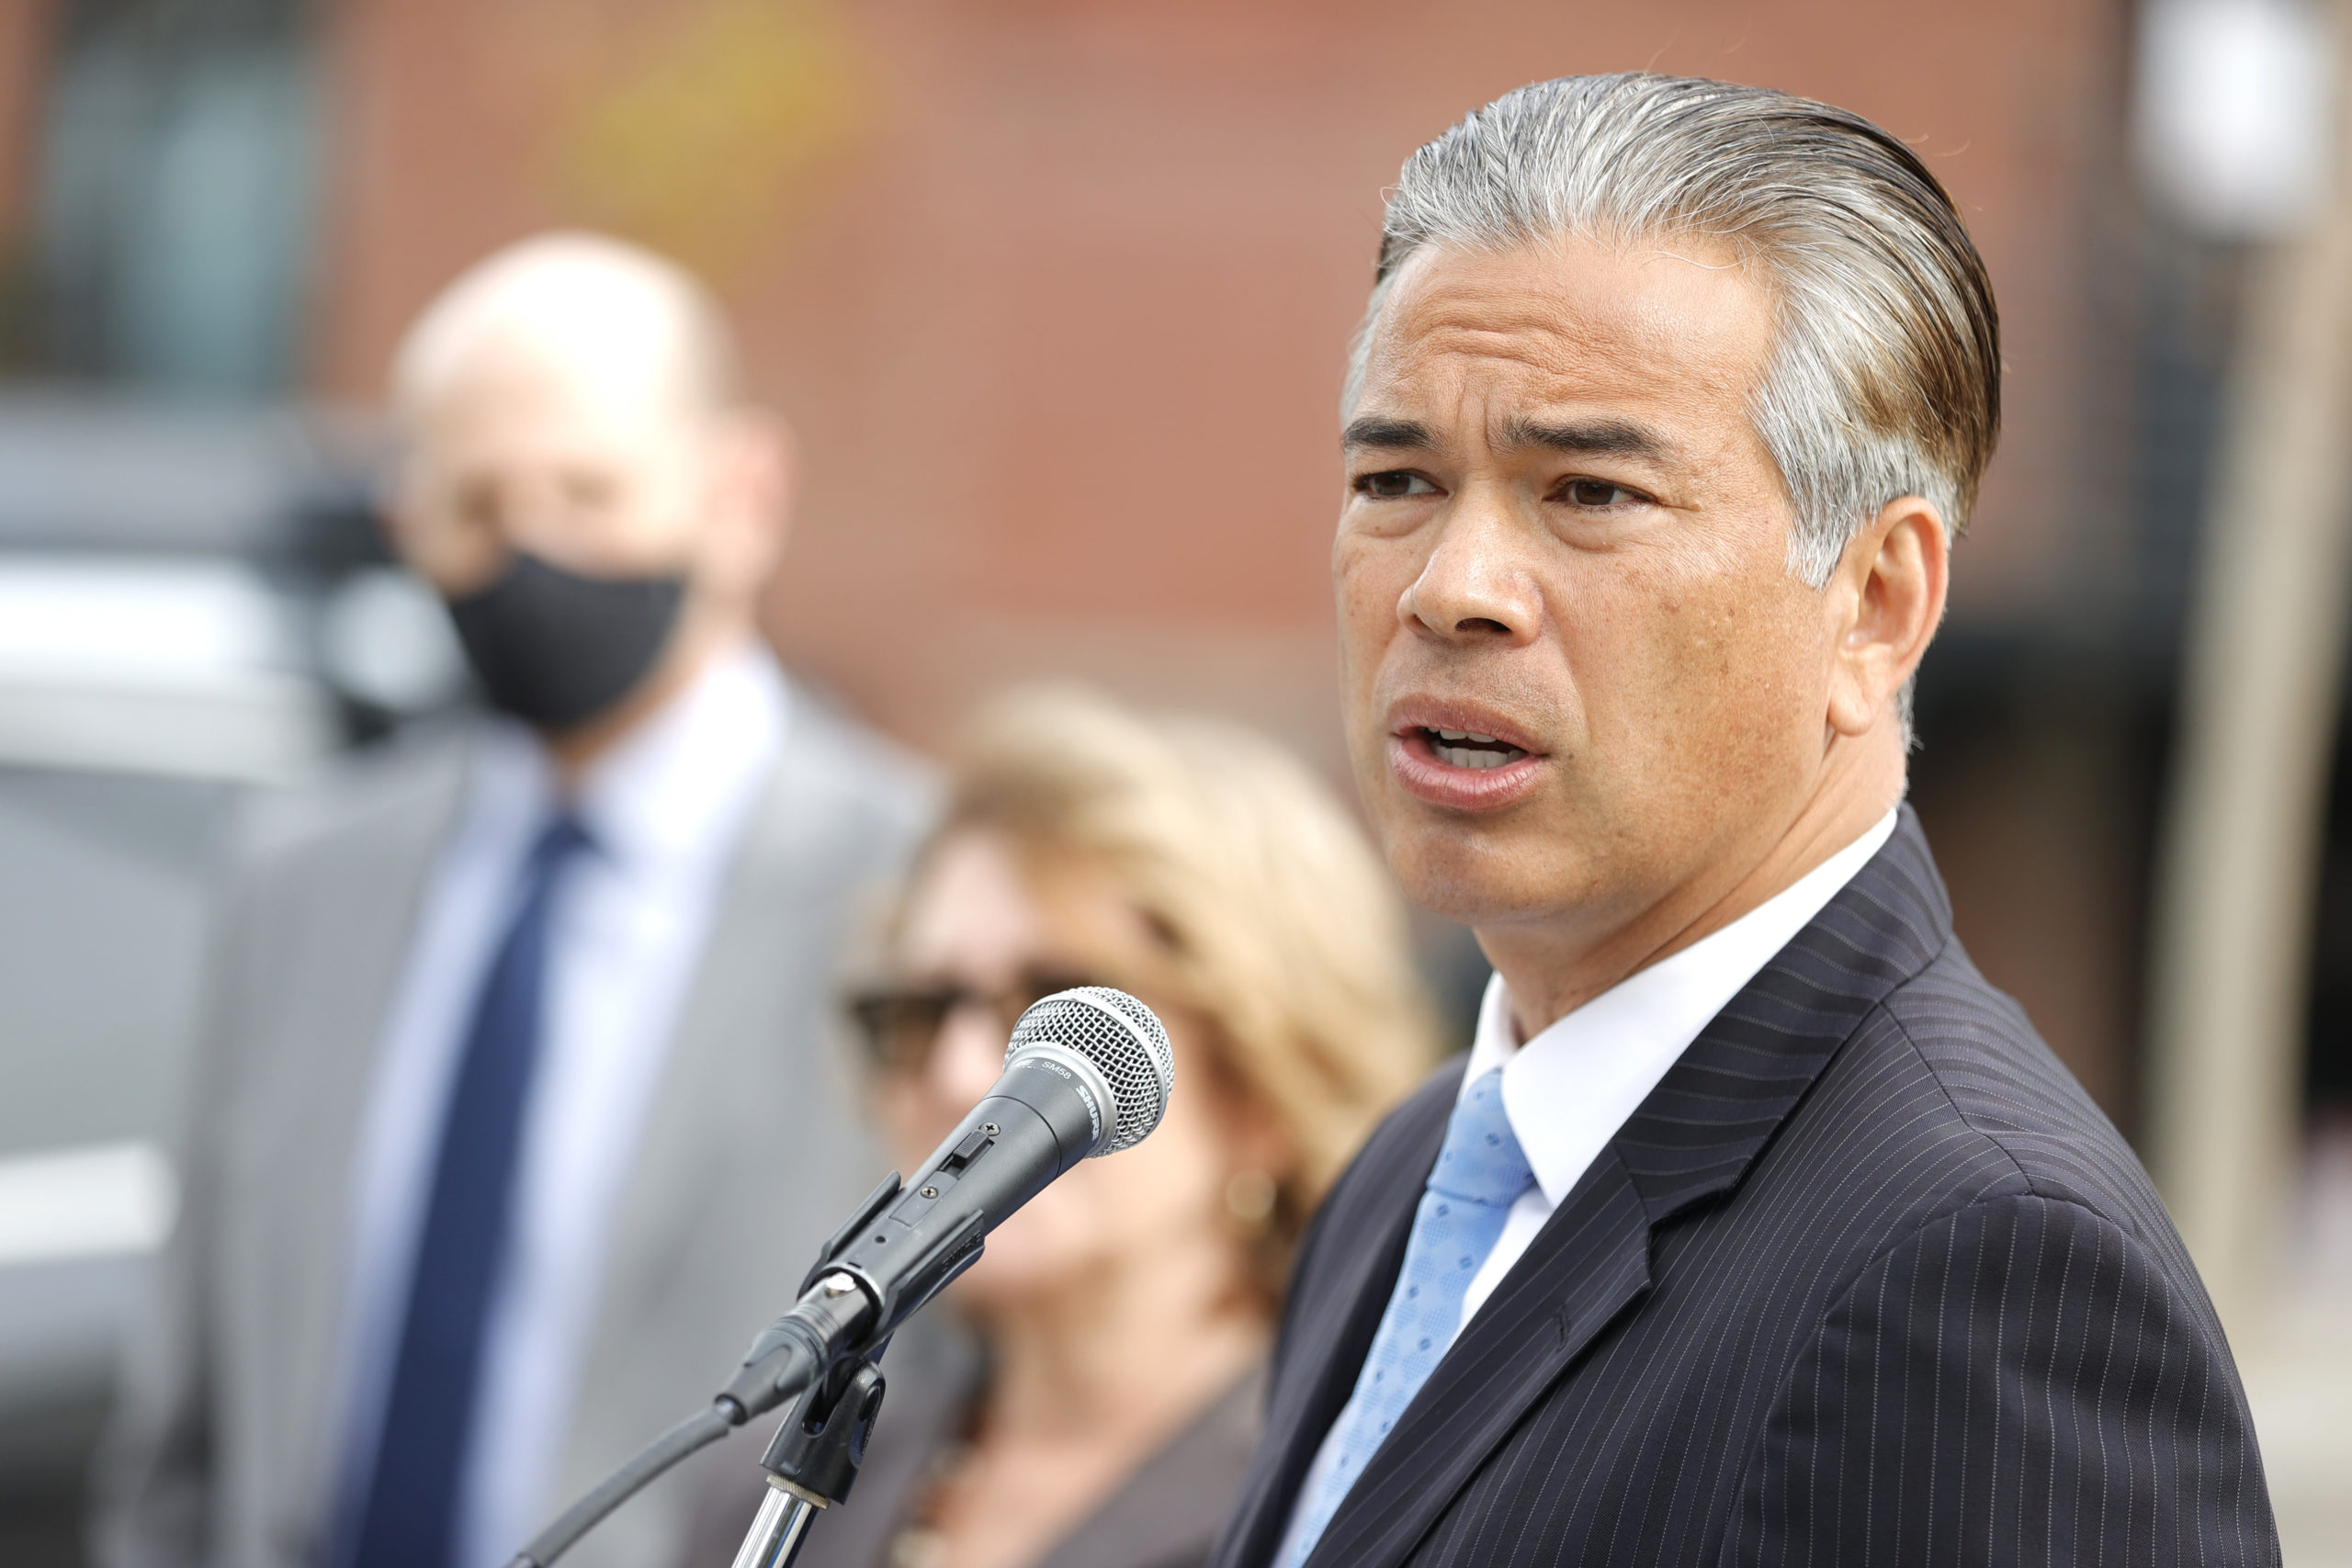 SAN FRANCISCO, CALIFORNIA - NOVEMBER 15: California Attorney General Rob Bonta speaks during a news conference outside of an Amazon distribution facility on November 15, 2021 in San Francisco, California. (Justin Sullivan/Getty Images)